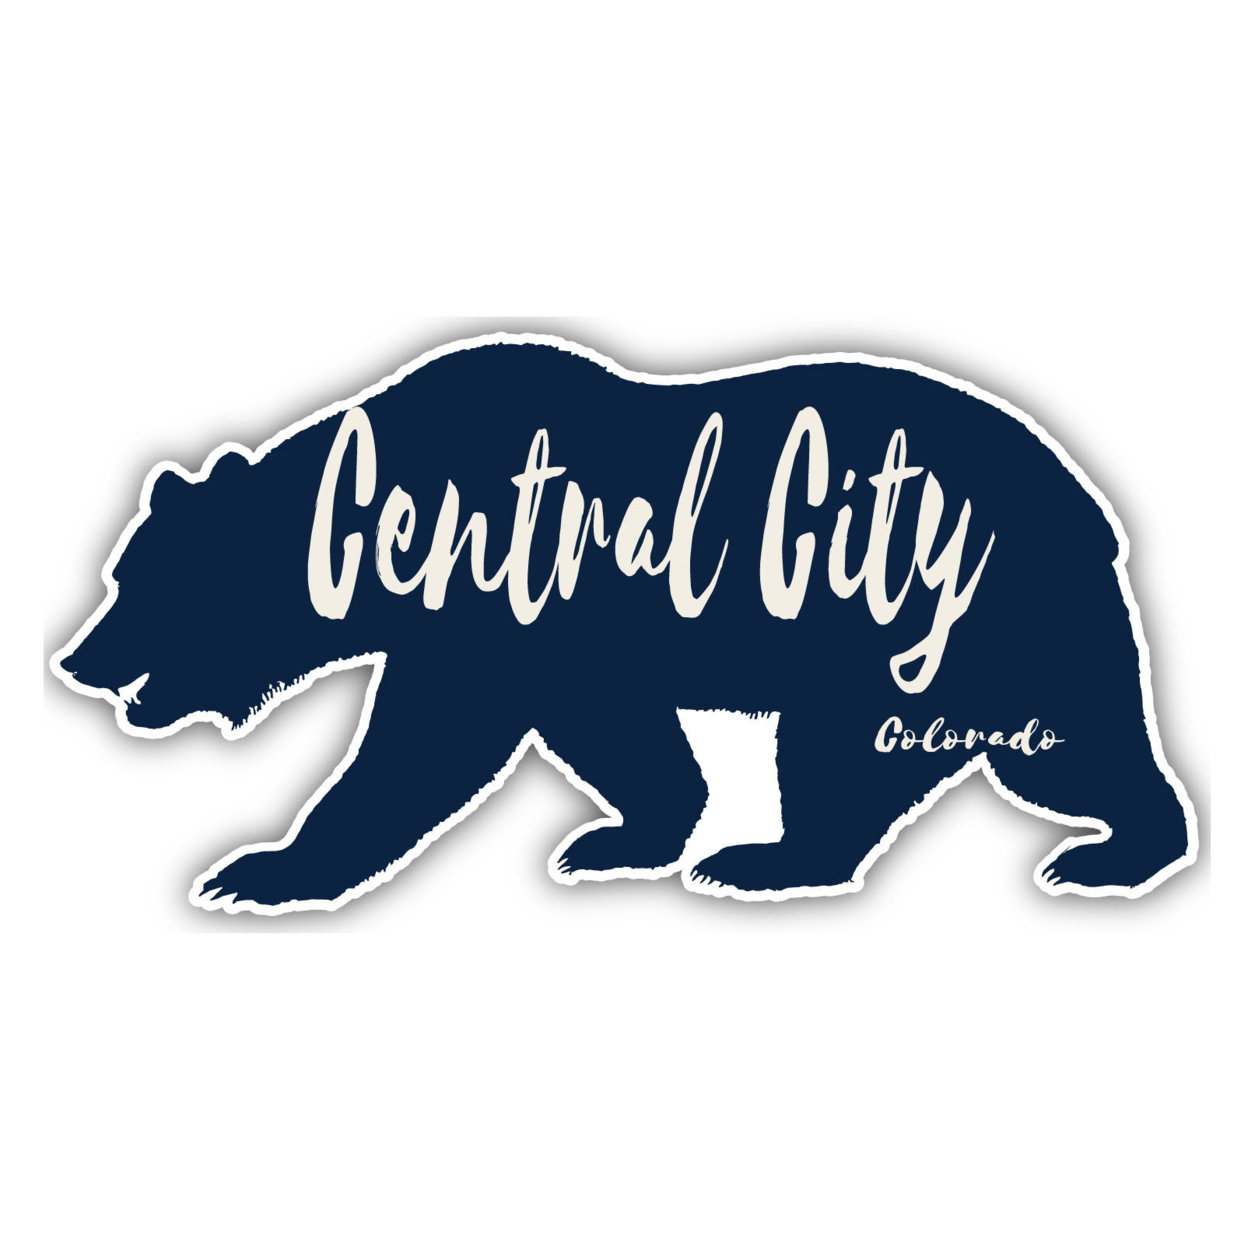 Central City Colorado Souvenir Decorative Stickers (Choose Theme And Size) - 4-Pack, 10-Inch, Tent